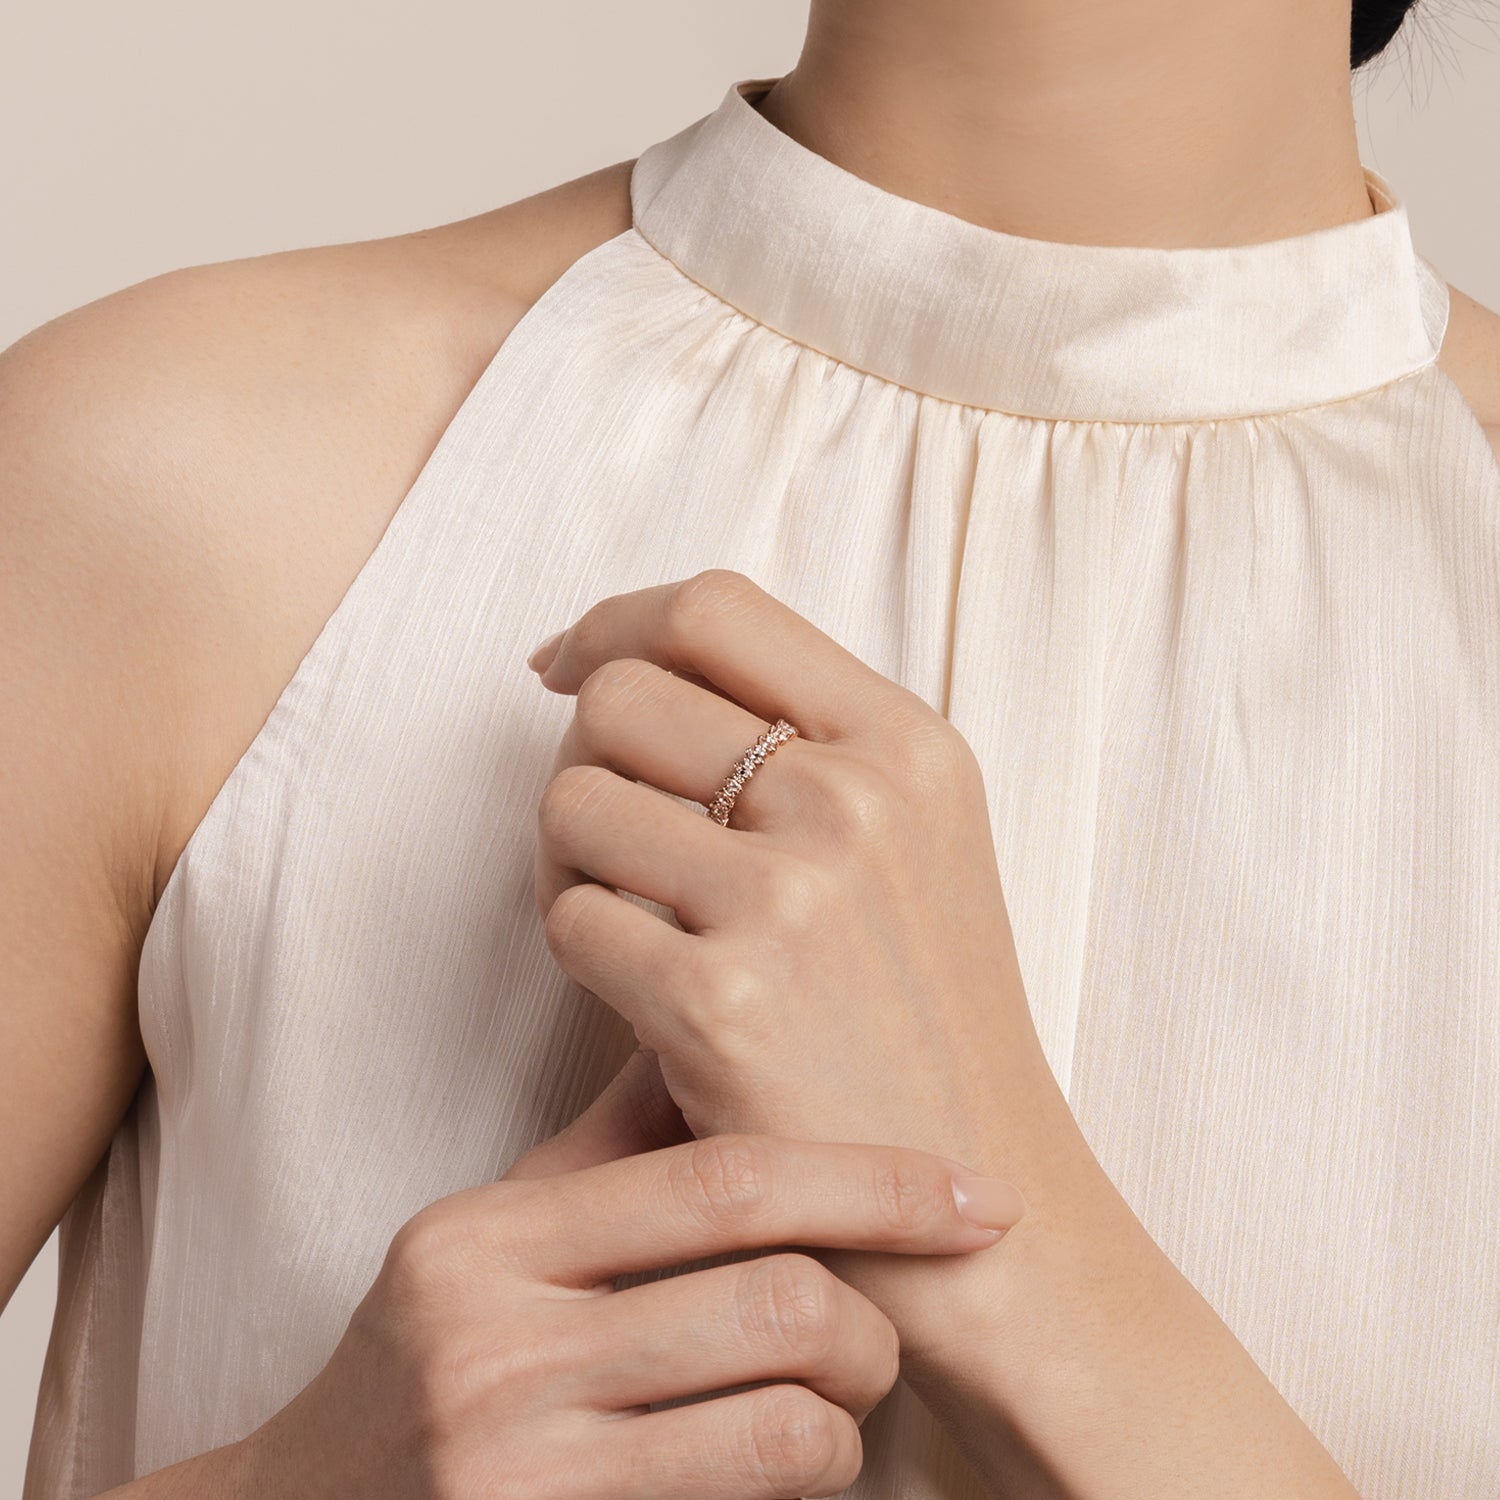 Elegant and statement ring. Model wears 14k solid rose gold ring with white topazes